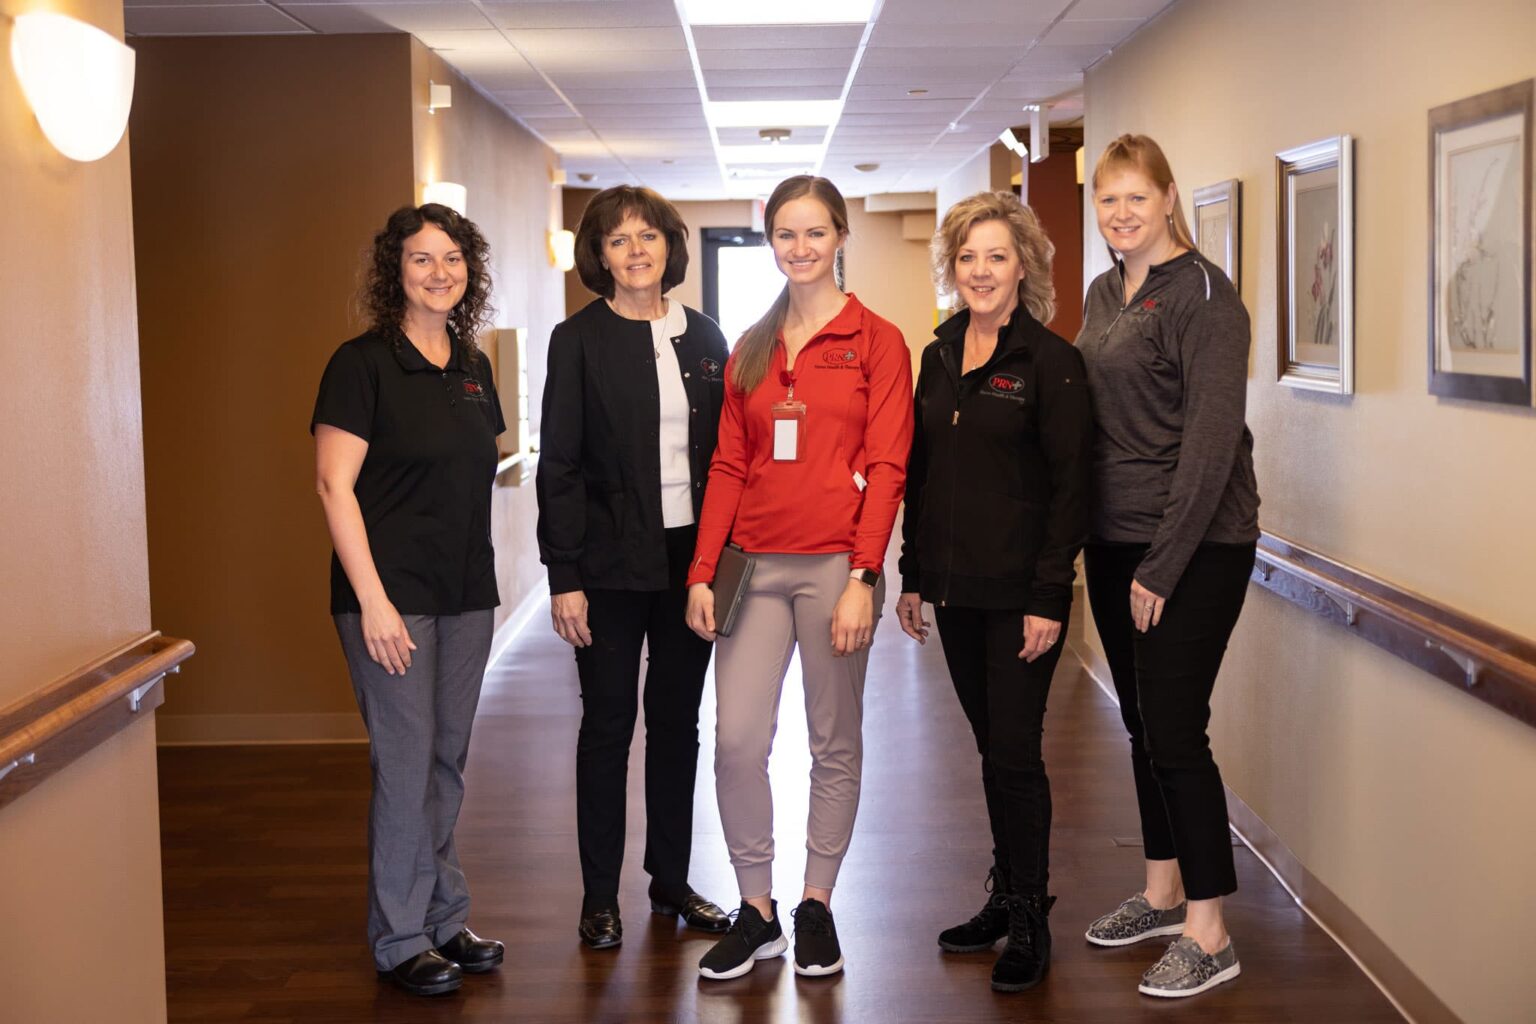 prn therapy team ready to work with facilities in wi